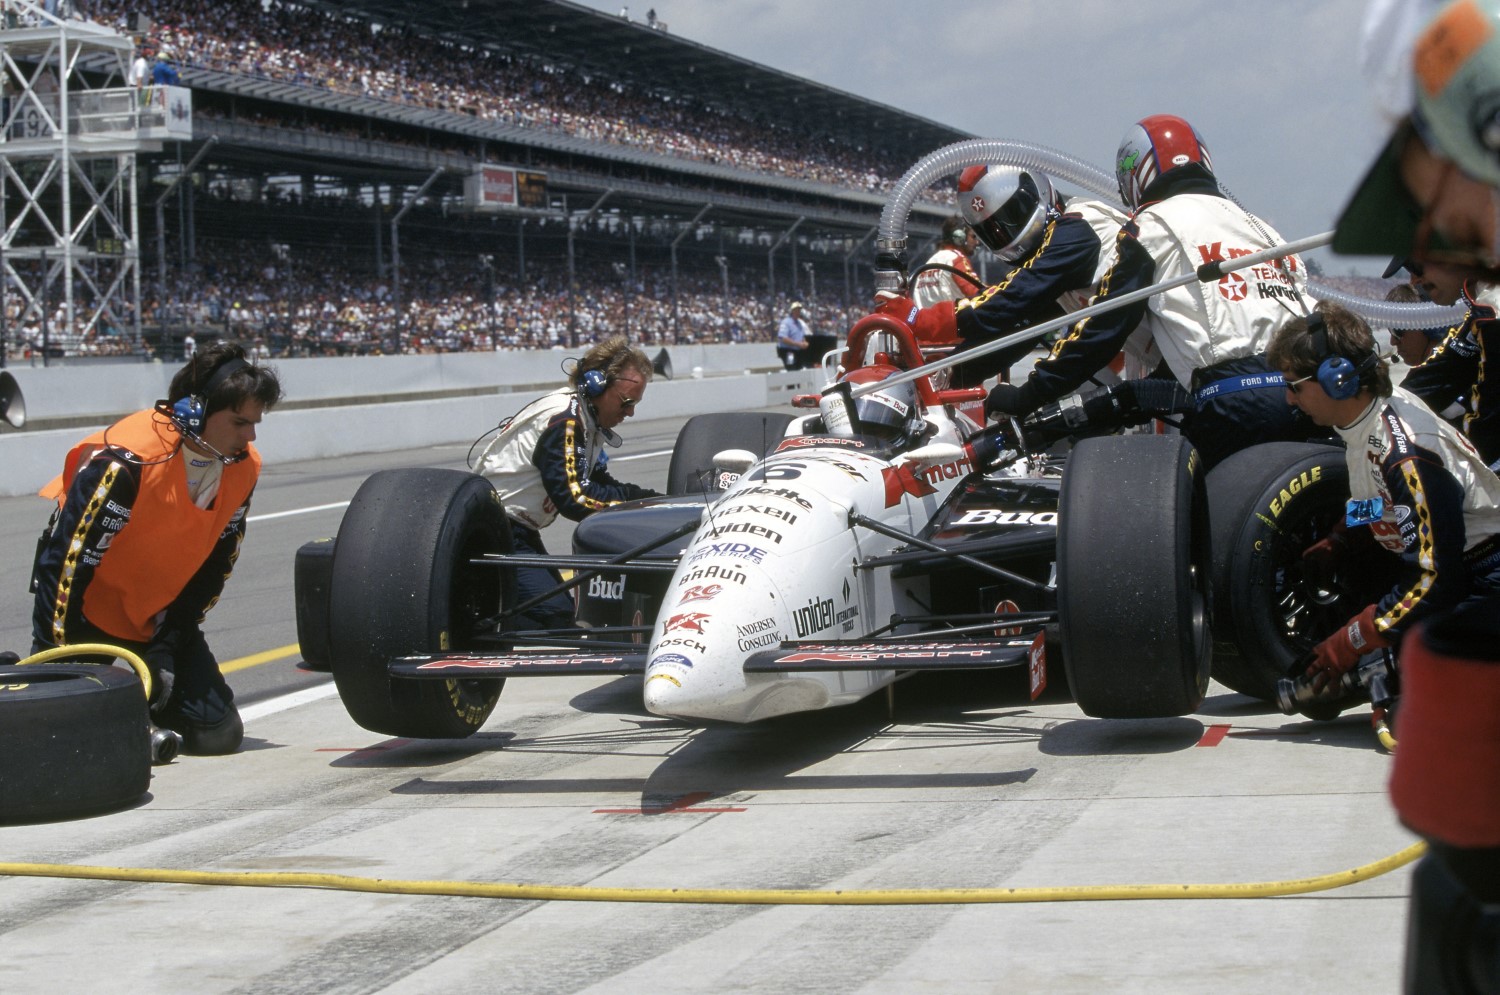 Andretti's last real race at Indy in 1994